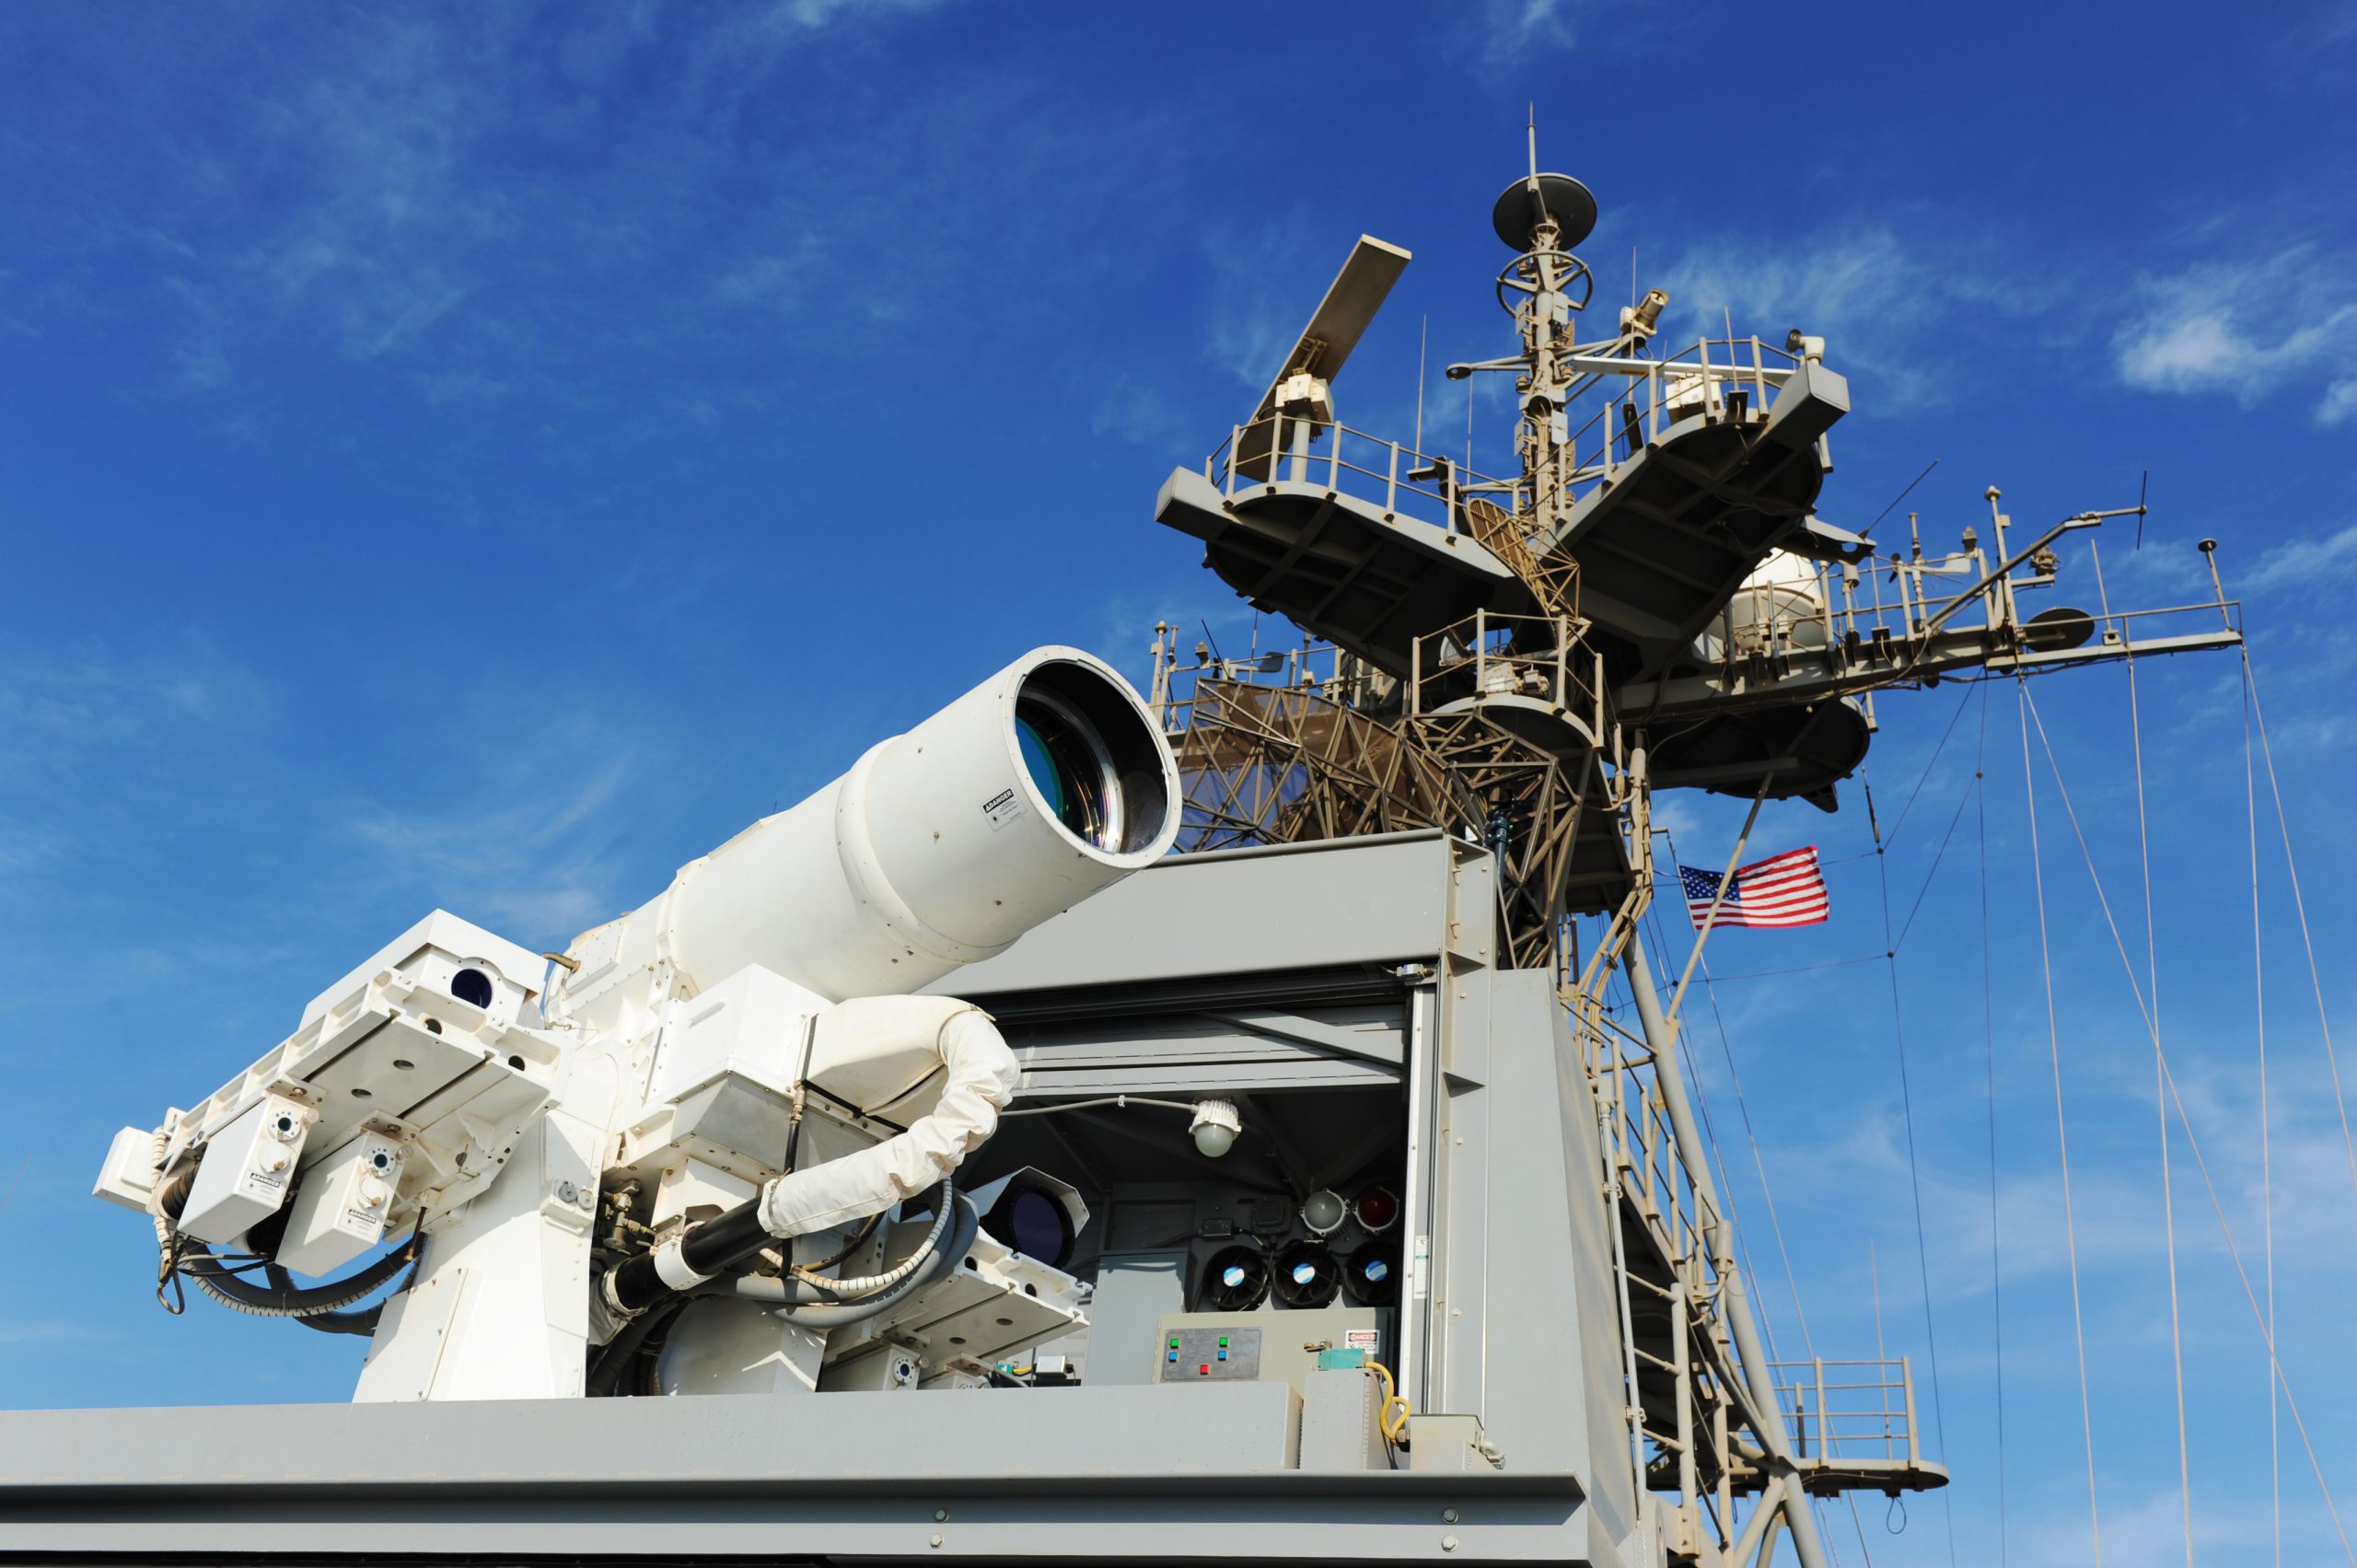 Raytheon Co., one of the world’s largest defense contractors, has been awarded a $13,1 million U.S. Air Force contract modification for High Energy Laser Weapon Systems (HELWS). The modification to the previously awarded contract covers the purchase of one additional HELWS being produced under the basic agreement, including outside continental U.S. (OCONUS) field assessment for purposes of experimentation. The U.S. Department of Defense said Thursday that work will be performed at OCONUS locations and is expected to be completed by Nov. 1, 2020. The total cumulative face value of the agreement is $36,939,636. Raytheon’s HELWS uses pure energy to detect, identify and instantly take down drones. It can target a single drone with precision. The HELWS is paired with Raytheon’s Multi-spectral Targeting System. It uses invisible beams of light to defeat hostile UASs. Mounted on a Polaris MRZR all-terrain vehicle, the system detects, identifies, tracks and engages drones. “Every day, there’s another story about a rogue drone incident,” said Stefan Baur, vice president of Raytheon Electronic Warfare Systems. “These threats aren’t going away, and in many instances, shooting them with a high energy laser weapon system is the most effective and safest way to bring them down.” The U.S. Air Force expected that new Raytheon’s laser weapon system will identify, tracks, and defends against enemy unmanned vehicles and other “close-in” defense situations. According to the current information, the Raytheon’s system is standalone, with a footprint of roughly 30 square feet. On a single charge from a standard 220v outlet, the same kind you plug your washing machine into at home, the HEL system onboard the light vehicle or buggy delivers four hours of intelligence, surveillance and reconnaissance capability and 20 to 30 laser shots. The system can also be coupled with a generator to provide virtually infinite magazine depth. The contract follows successful demonstrations of Raytheon’s directed energy systems for the Air Force and the U.S. Army.